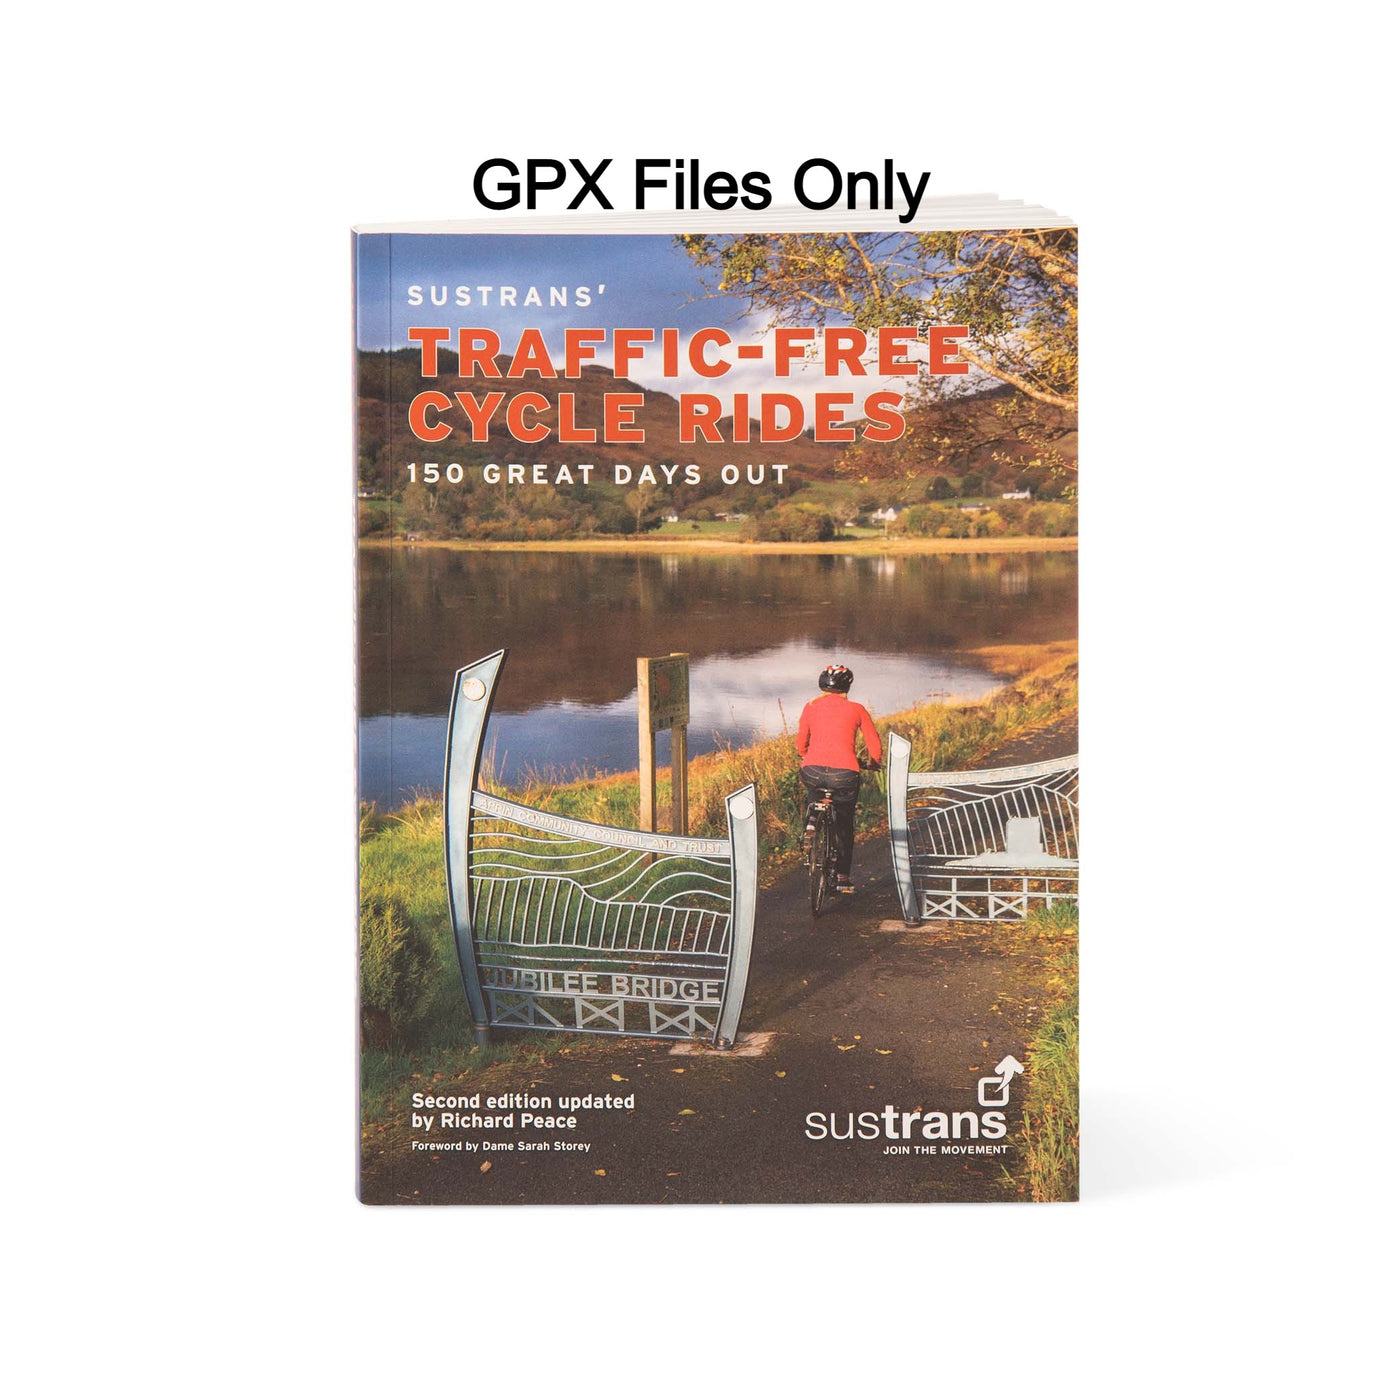 Sustrans' Traffic-Free Cycle Rides: 150 Great Days Out. Cover image for GPX files.